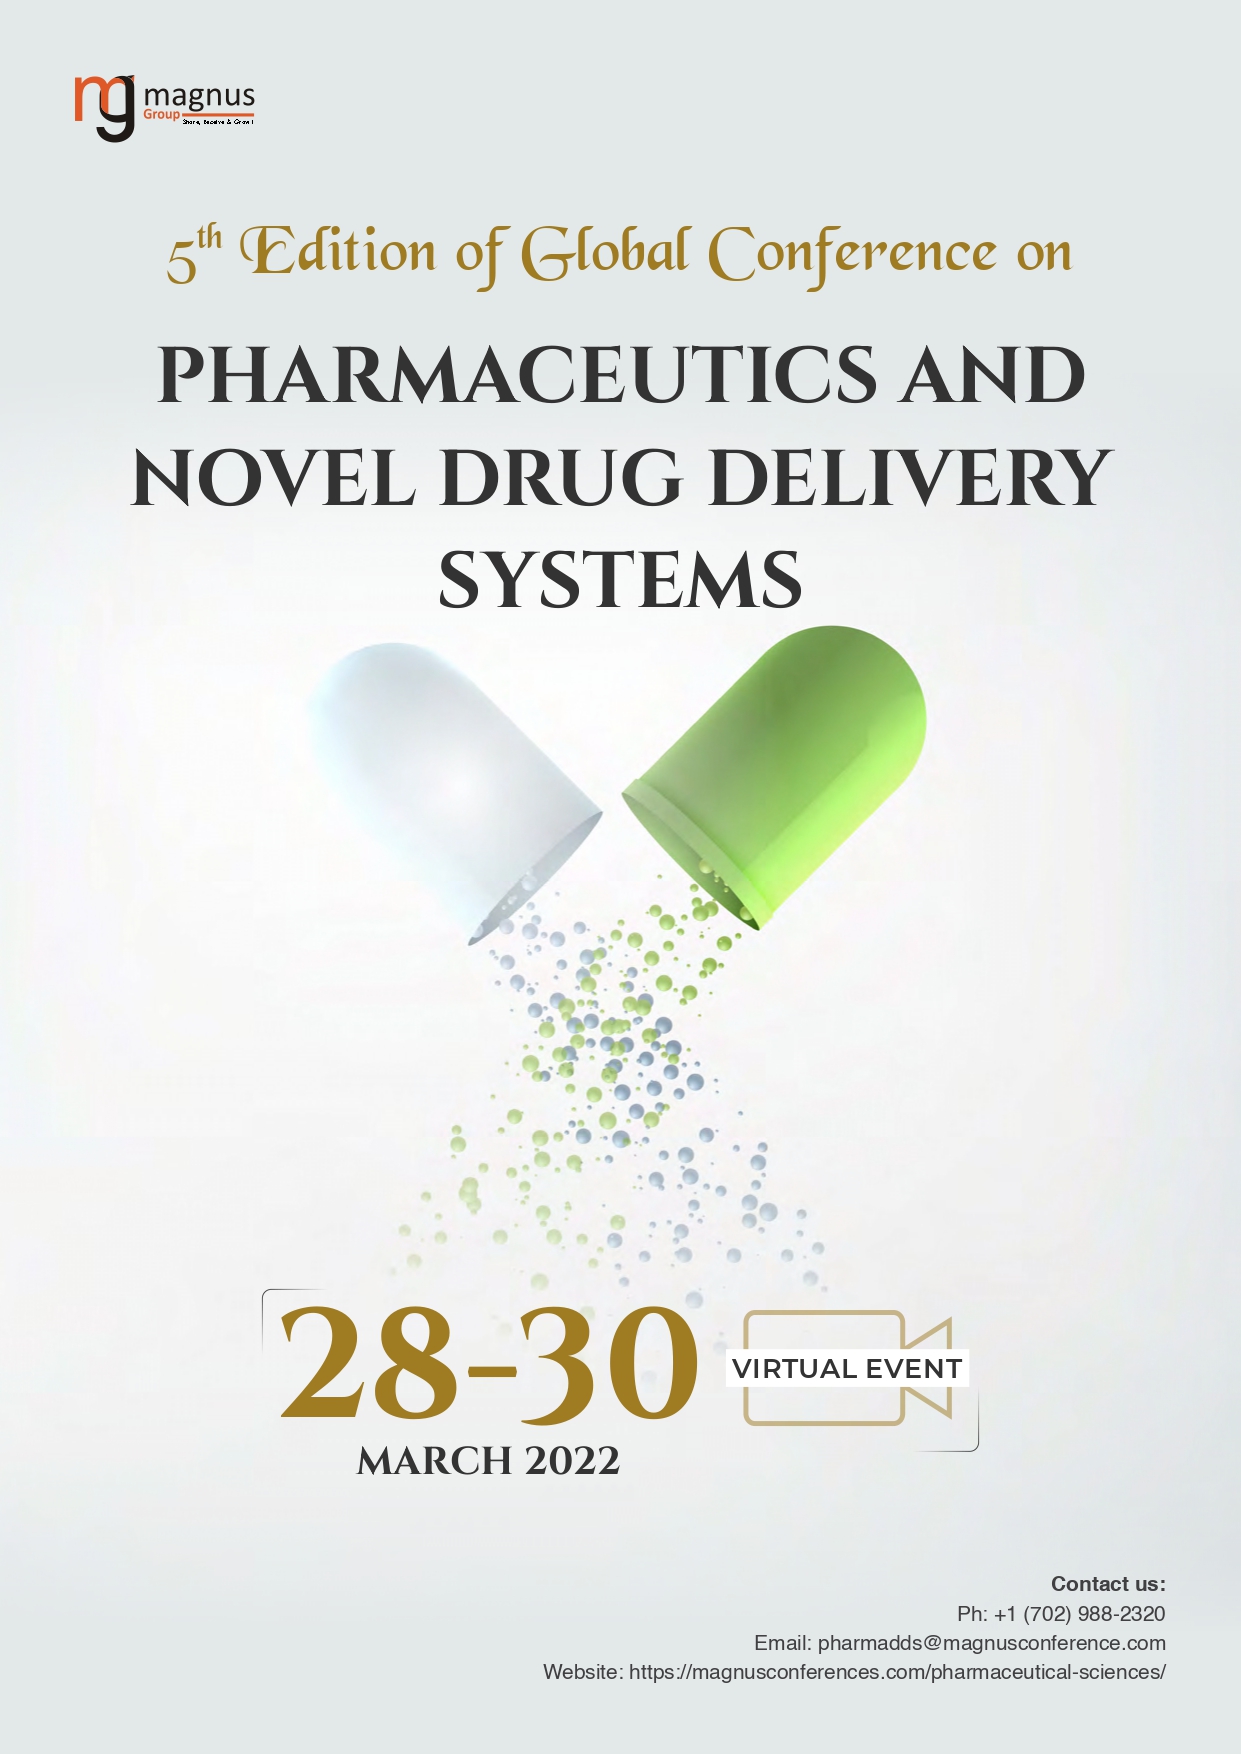 5th Edition of Global Conference on Pharmaceutics and Novel Drug Delivery Systems Book